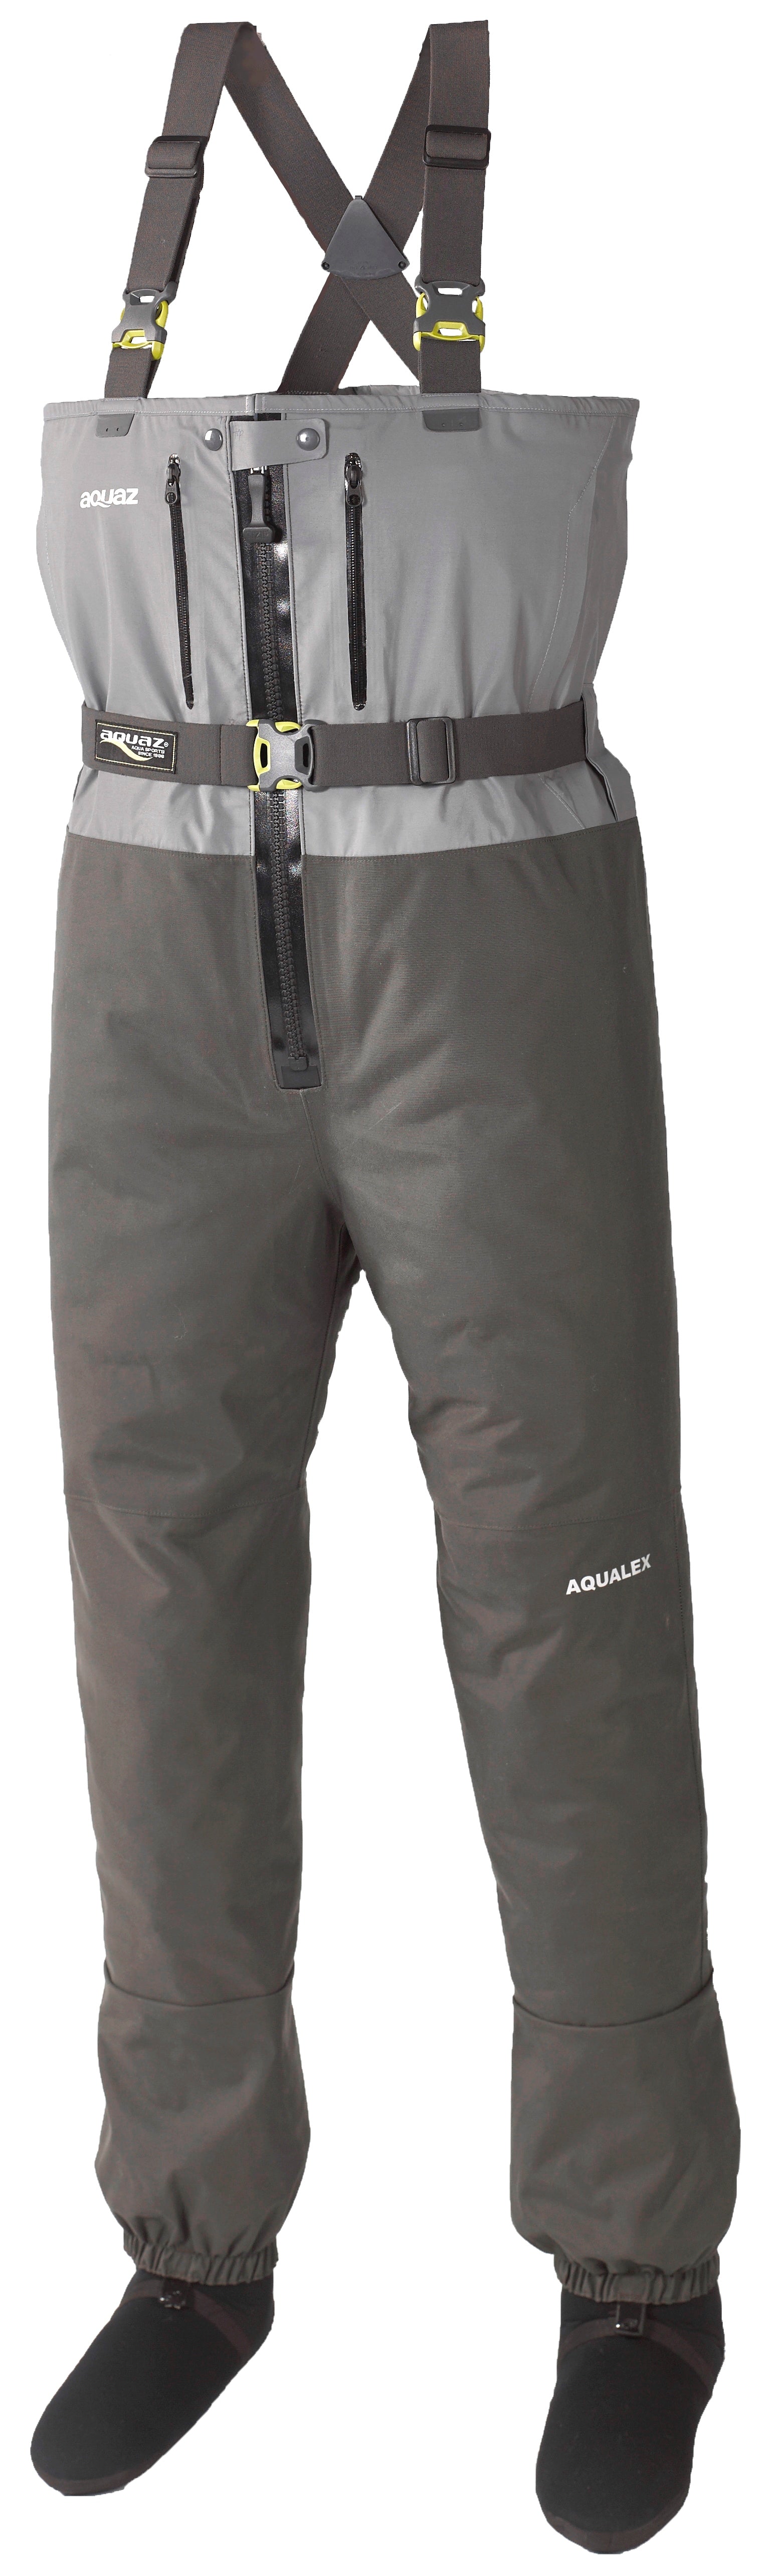  HWBZSZY Kids Overalls Waterproof Wading Pants with